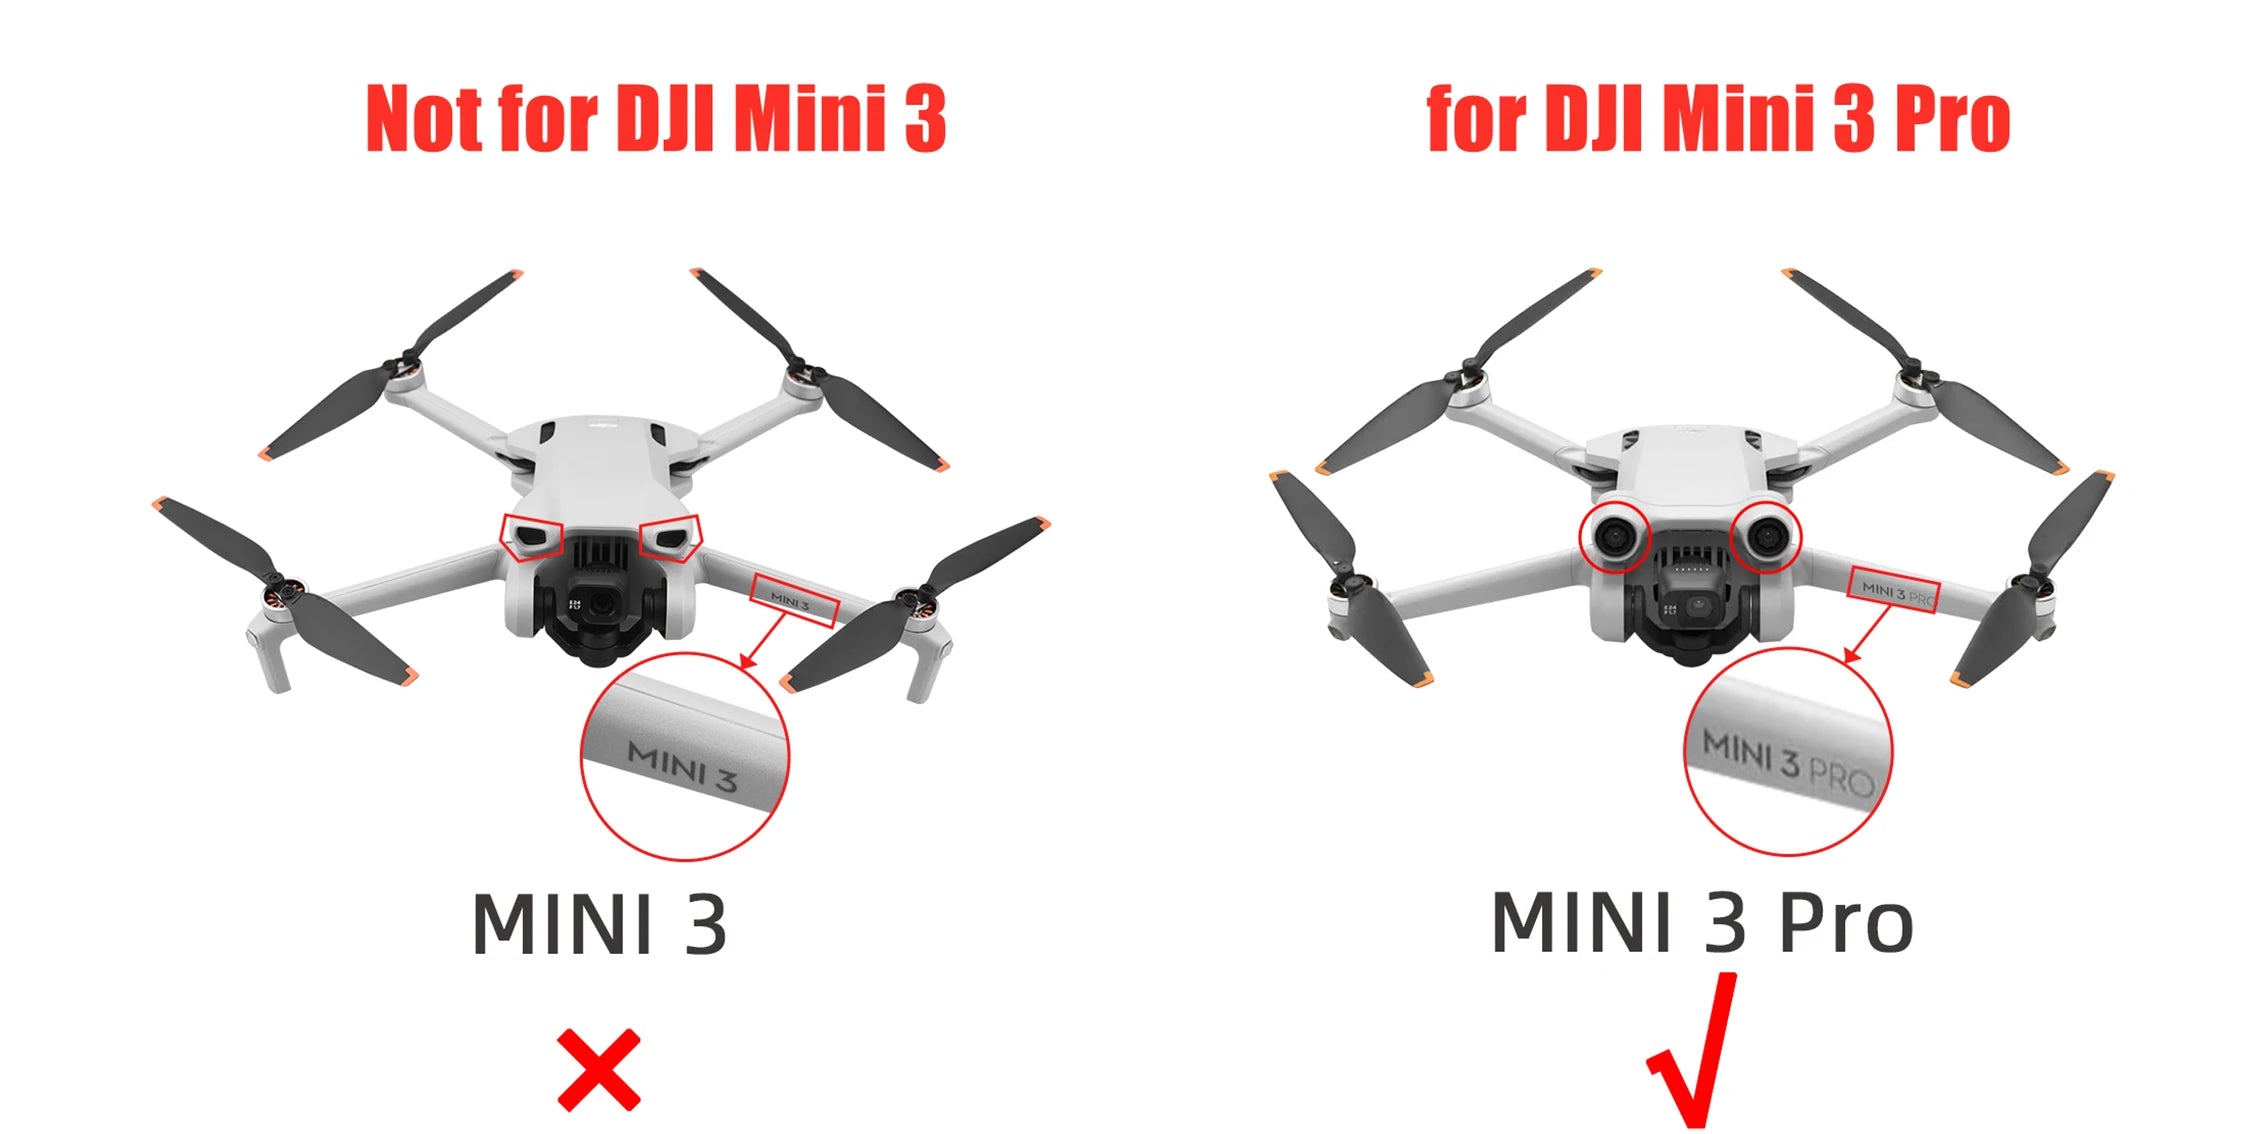 Hand Guard For DJI Mini 3 Pro Drone, Installation shall be convenient and fast without damaging the machine.